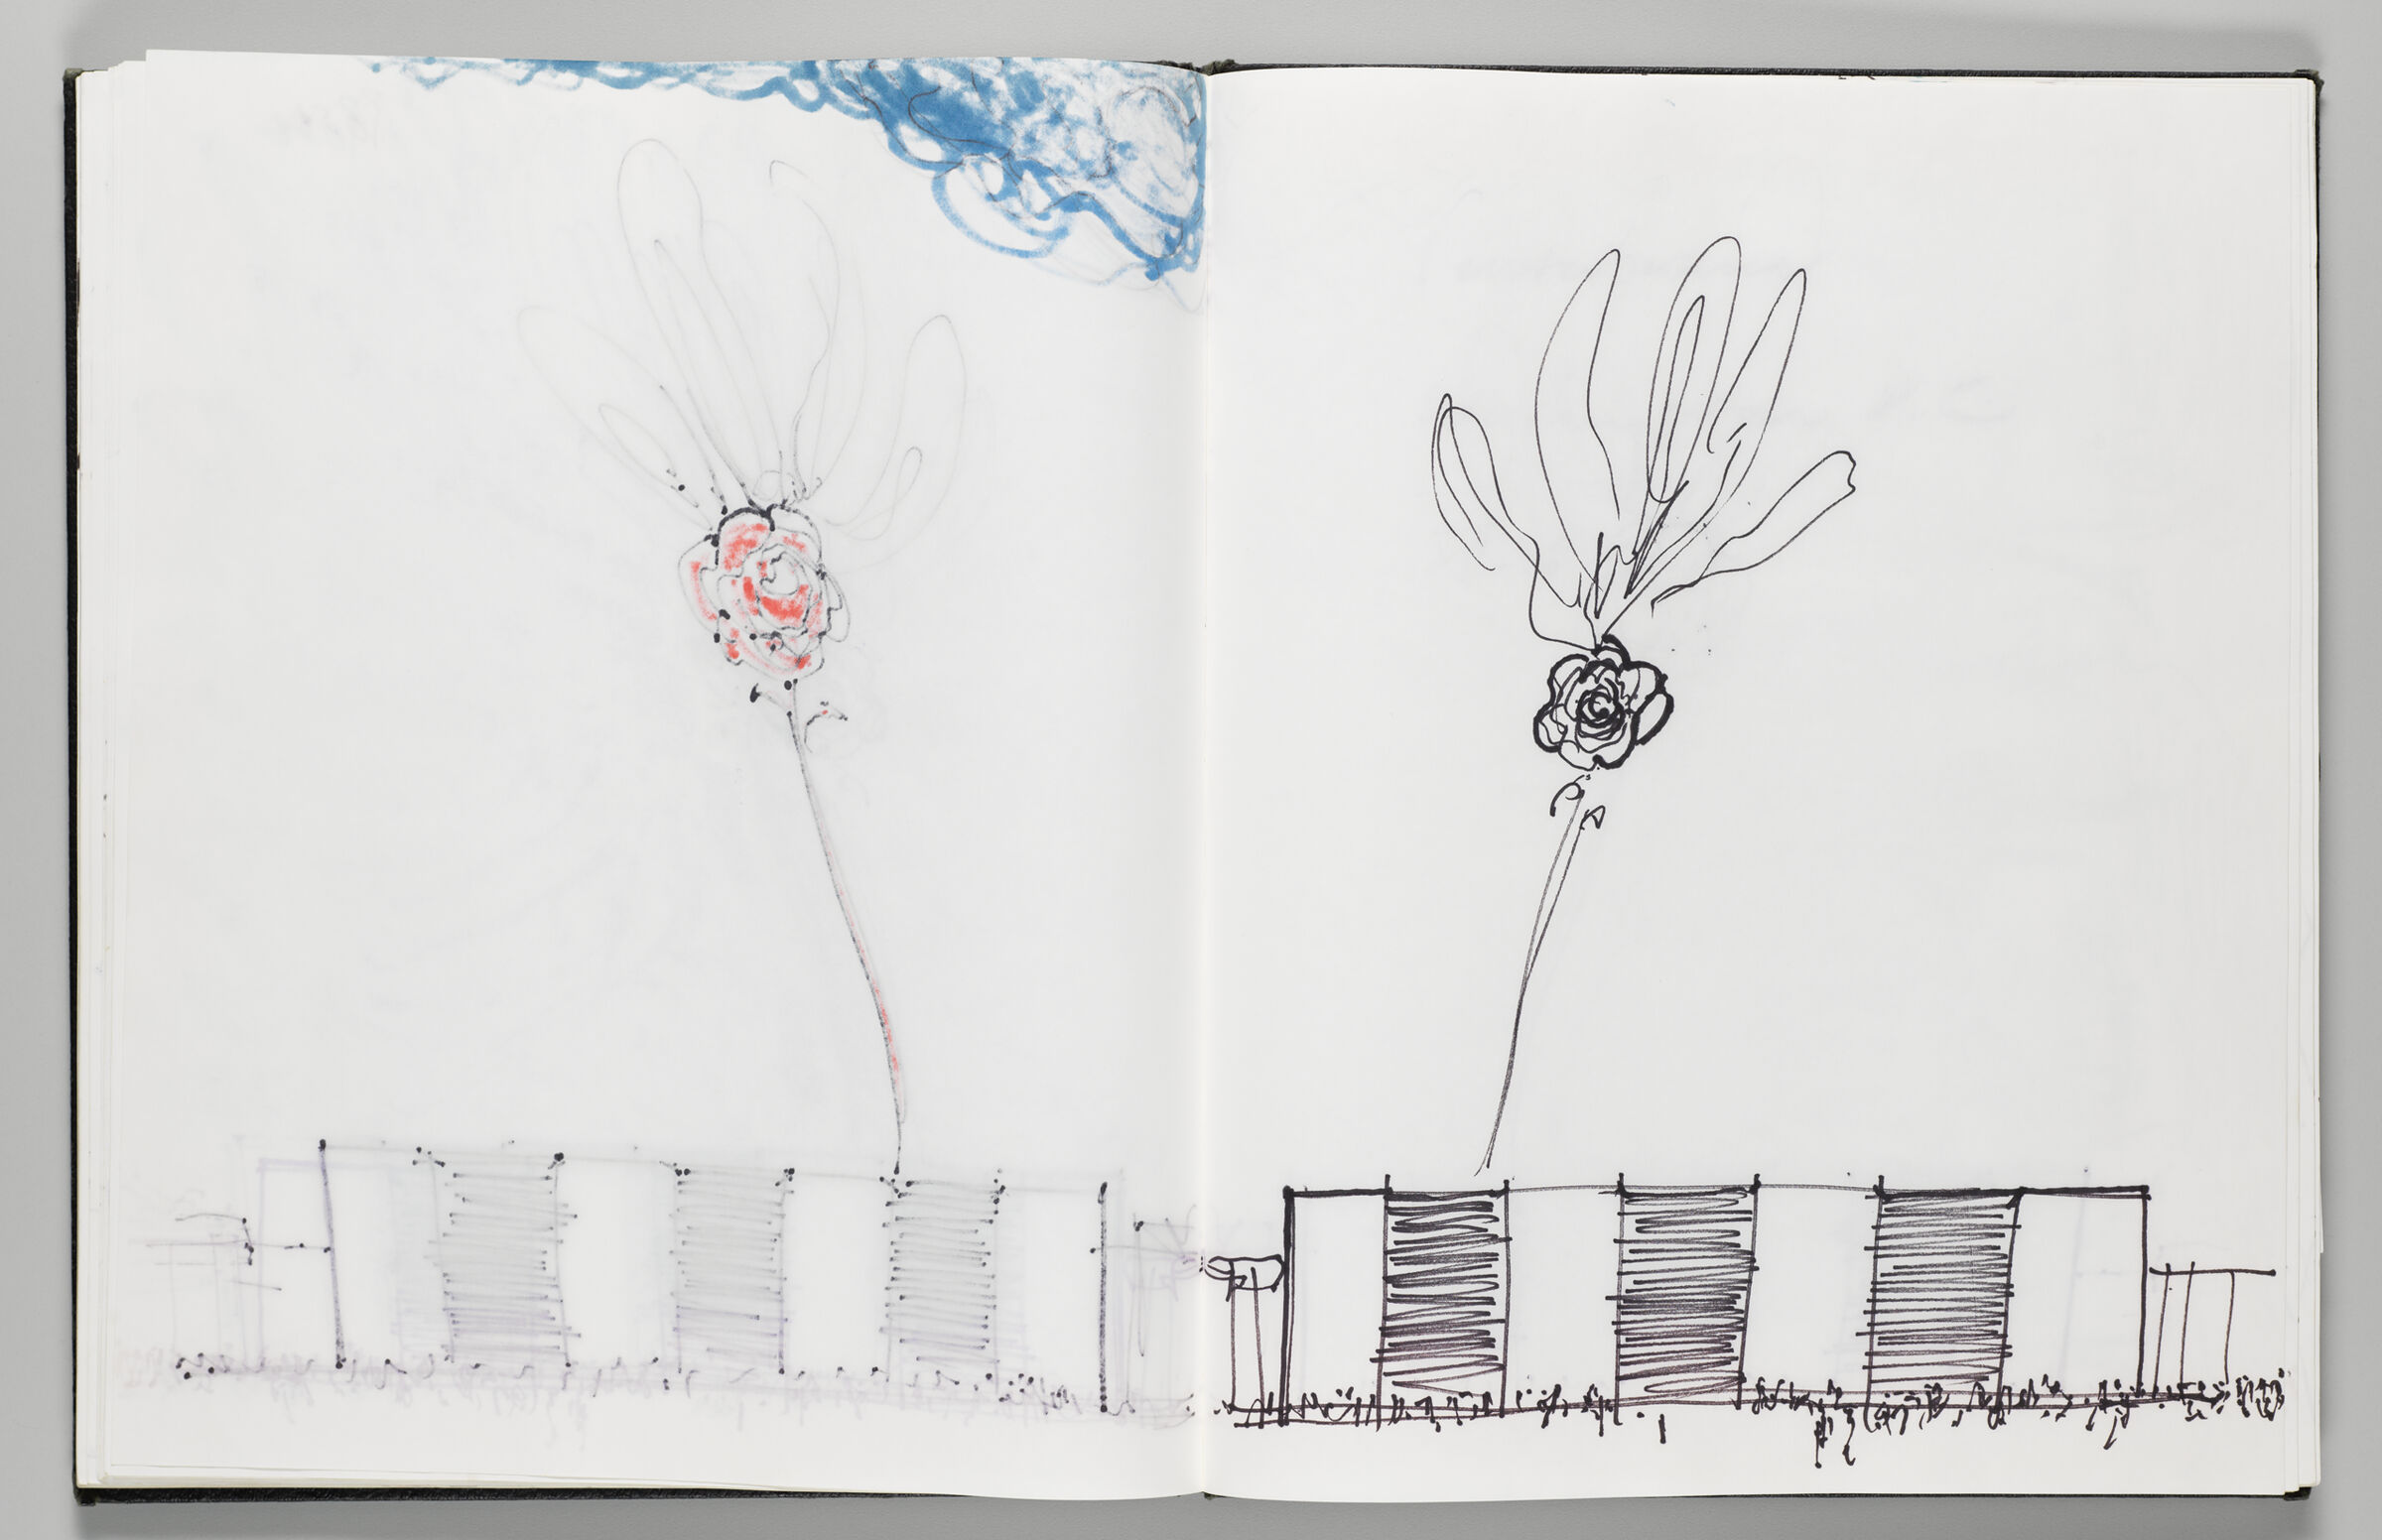 Untitled (Bleed-Through Of Previous Page, Left Page); Untitled (Rose Inflatable, Right Page)